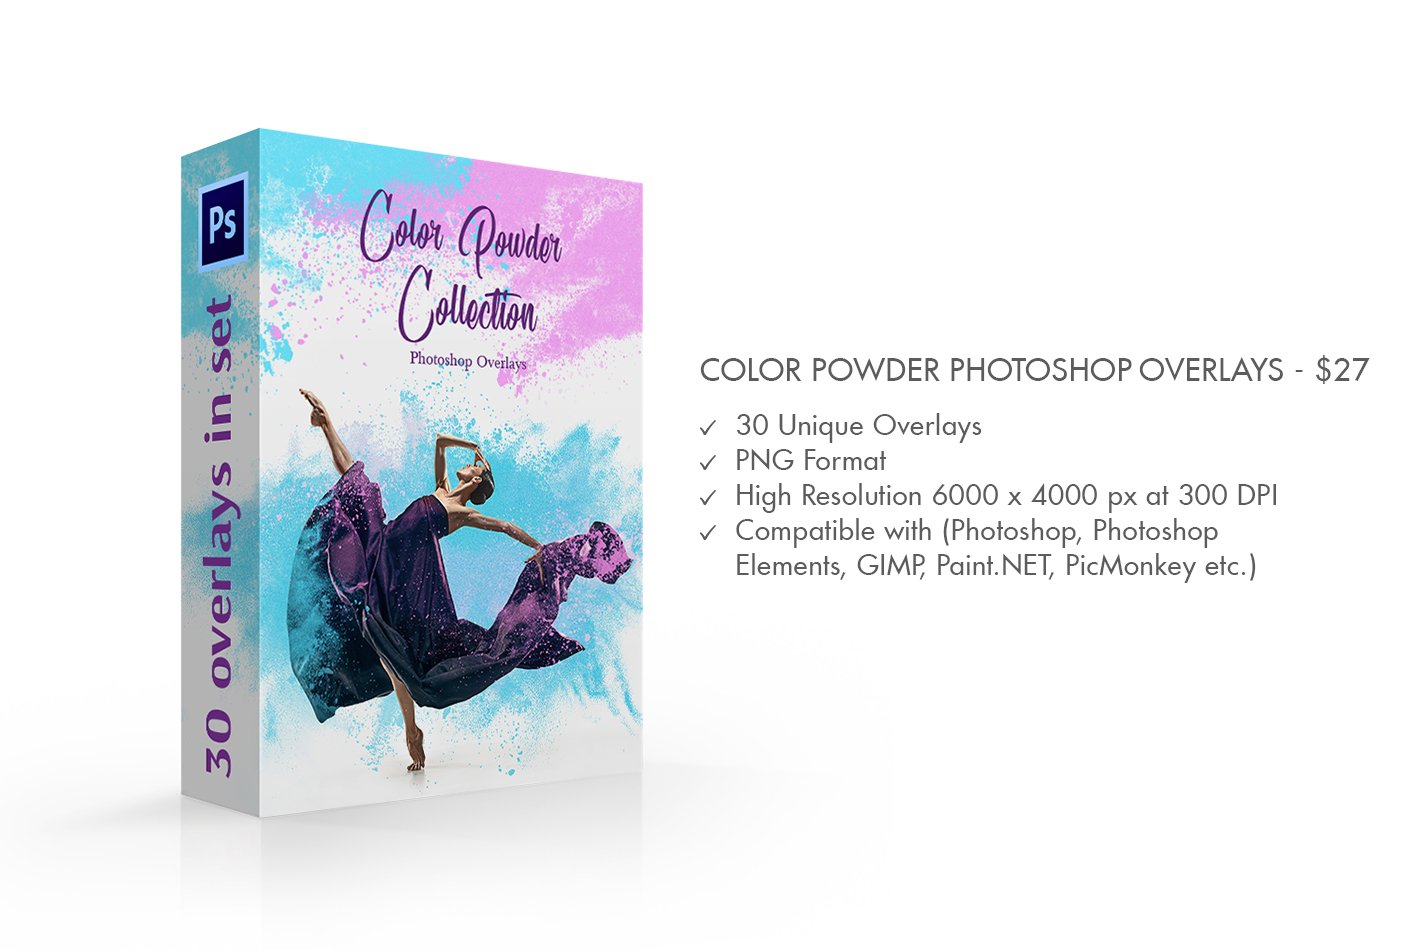 Color Powder Photoshop Overlayspreview image.